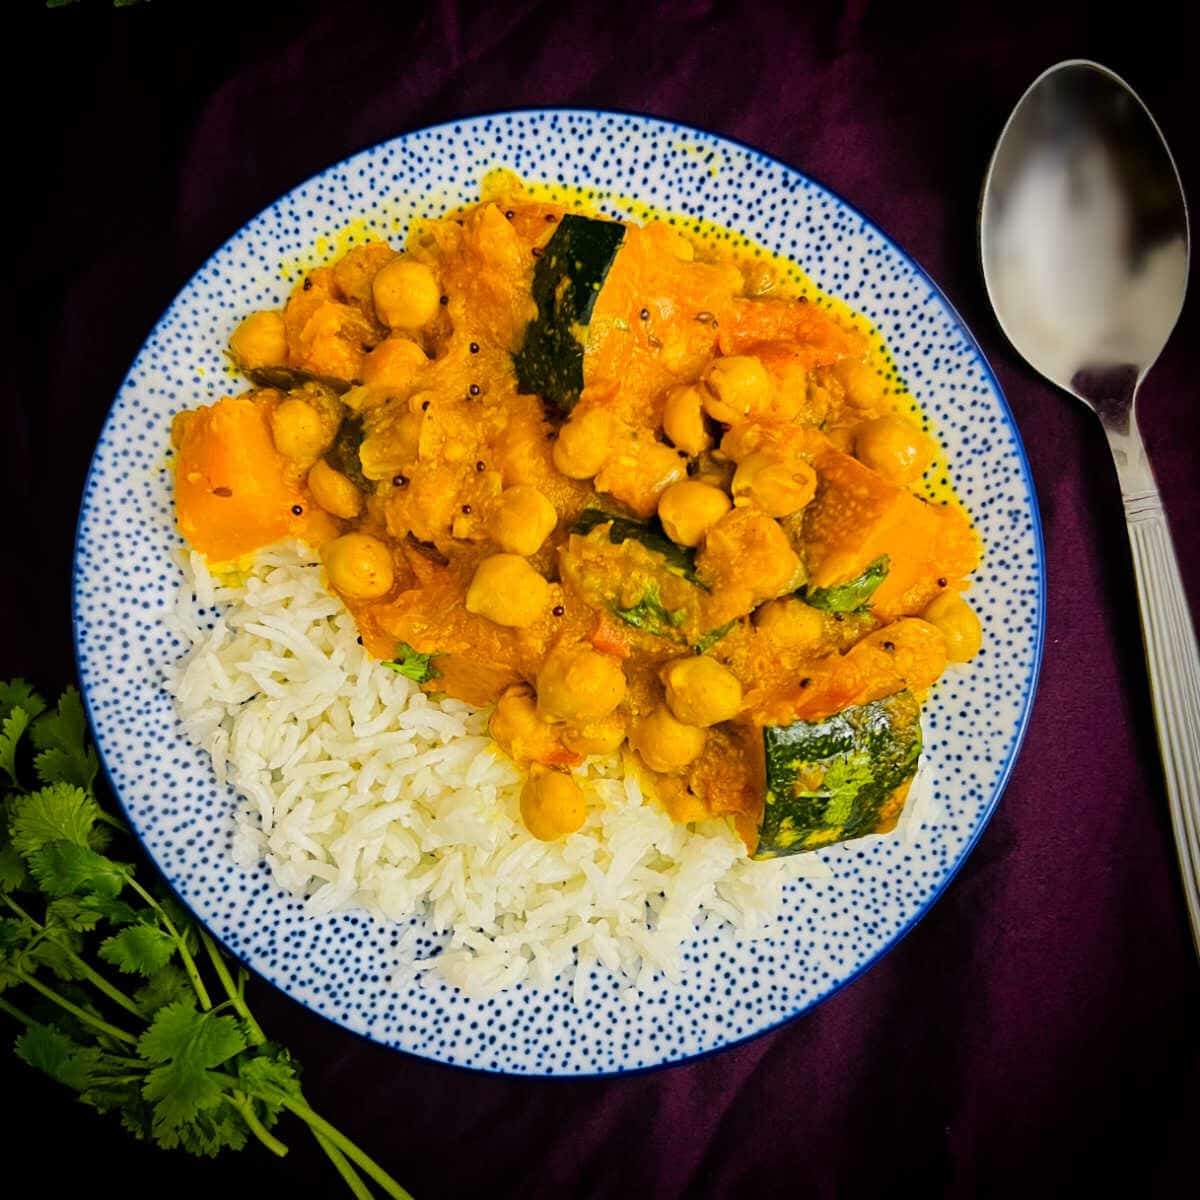 Pumpkin chickpea curry and basmati rice served on a plate.